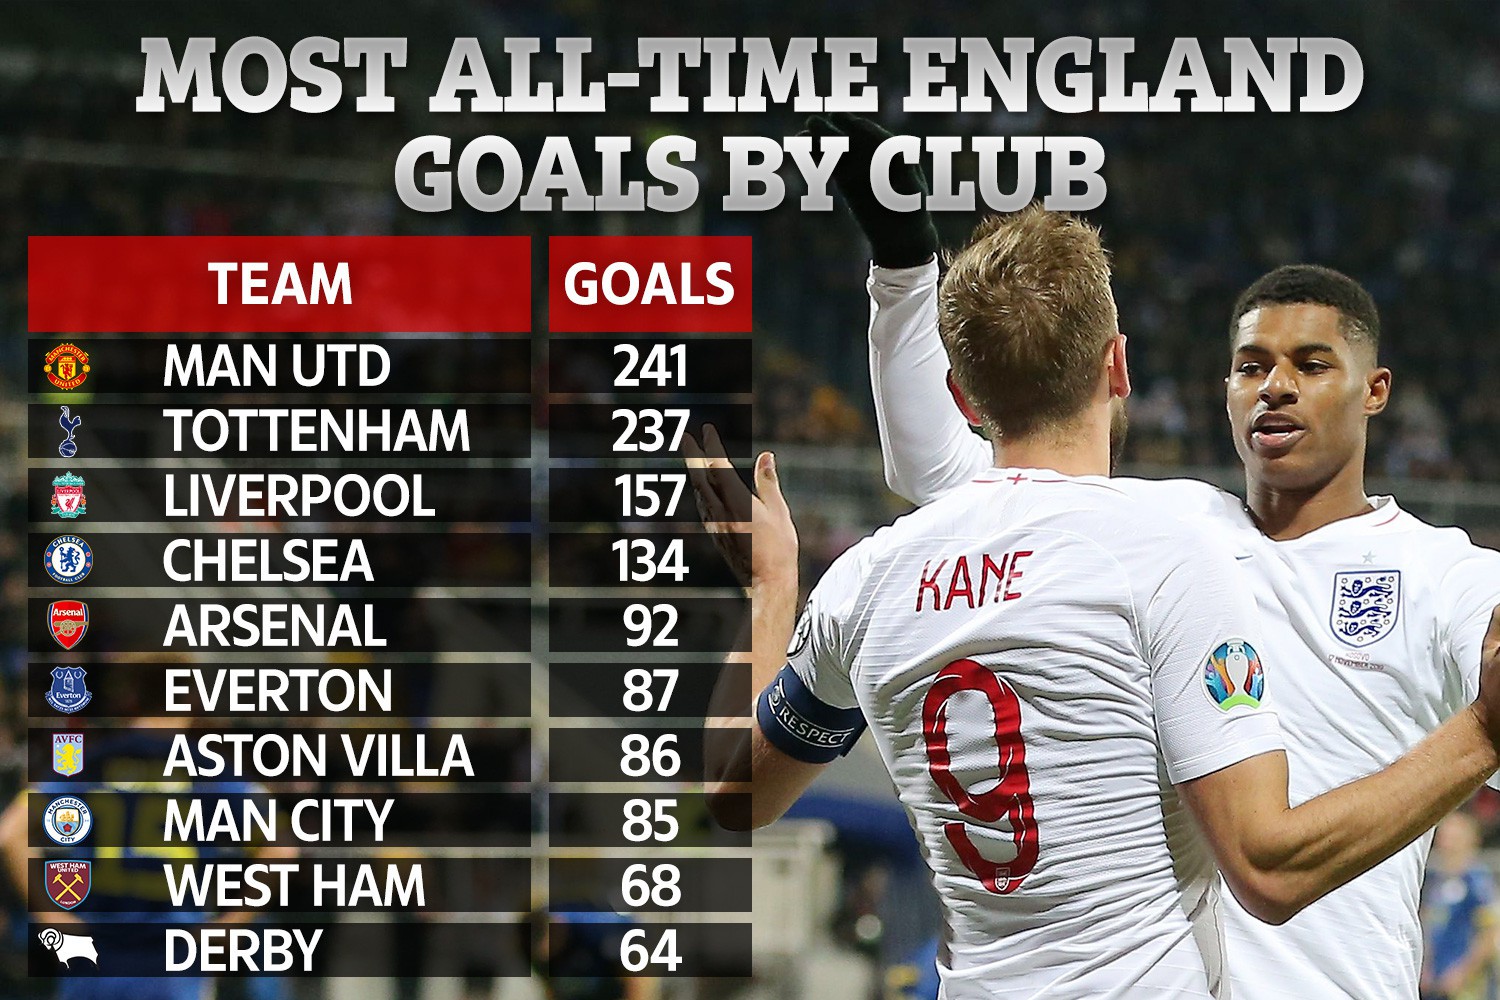 , Man Utd stars have scored most England goals thanks to Charlton, Rooney and Rashford but how does your club compare?